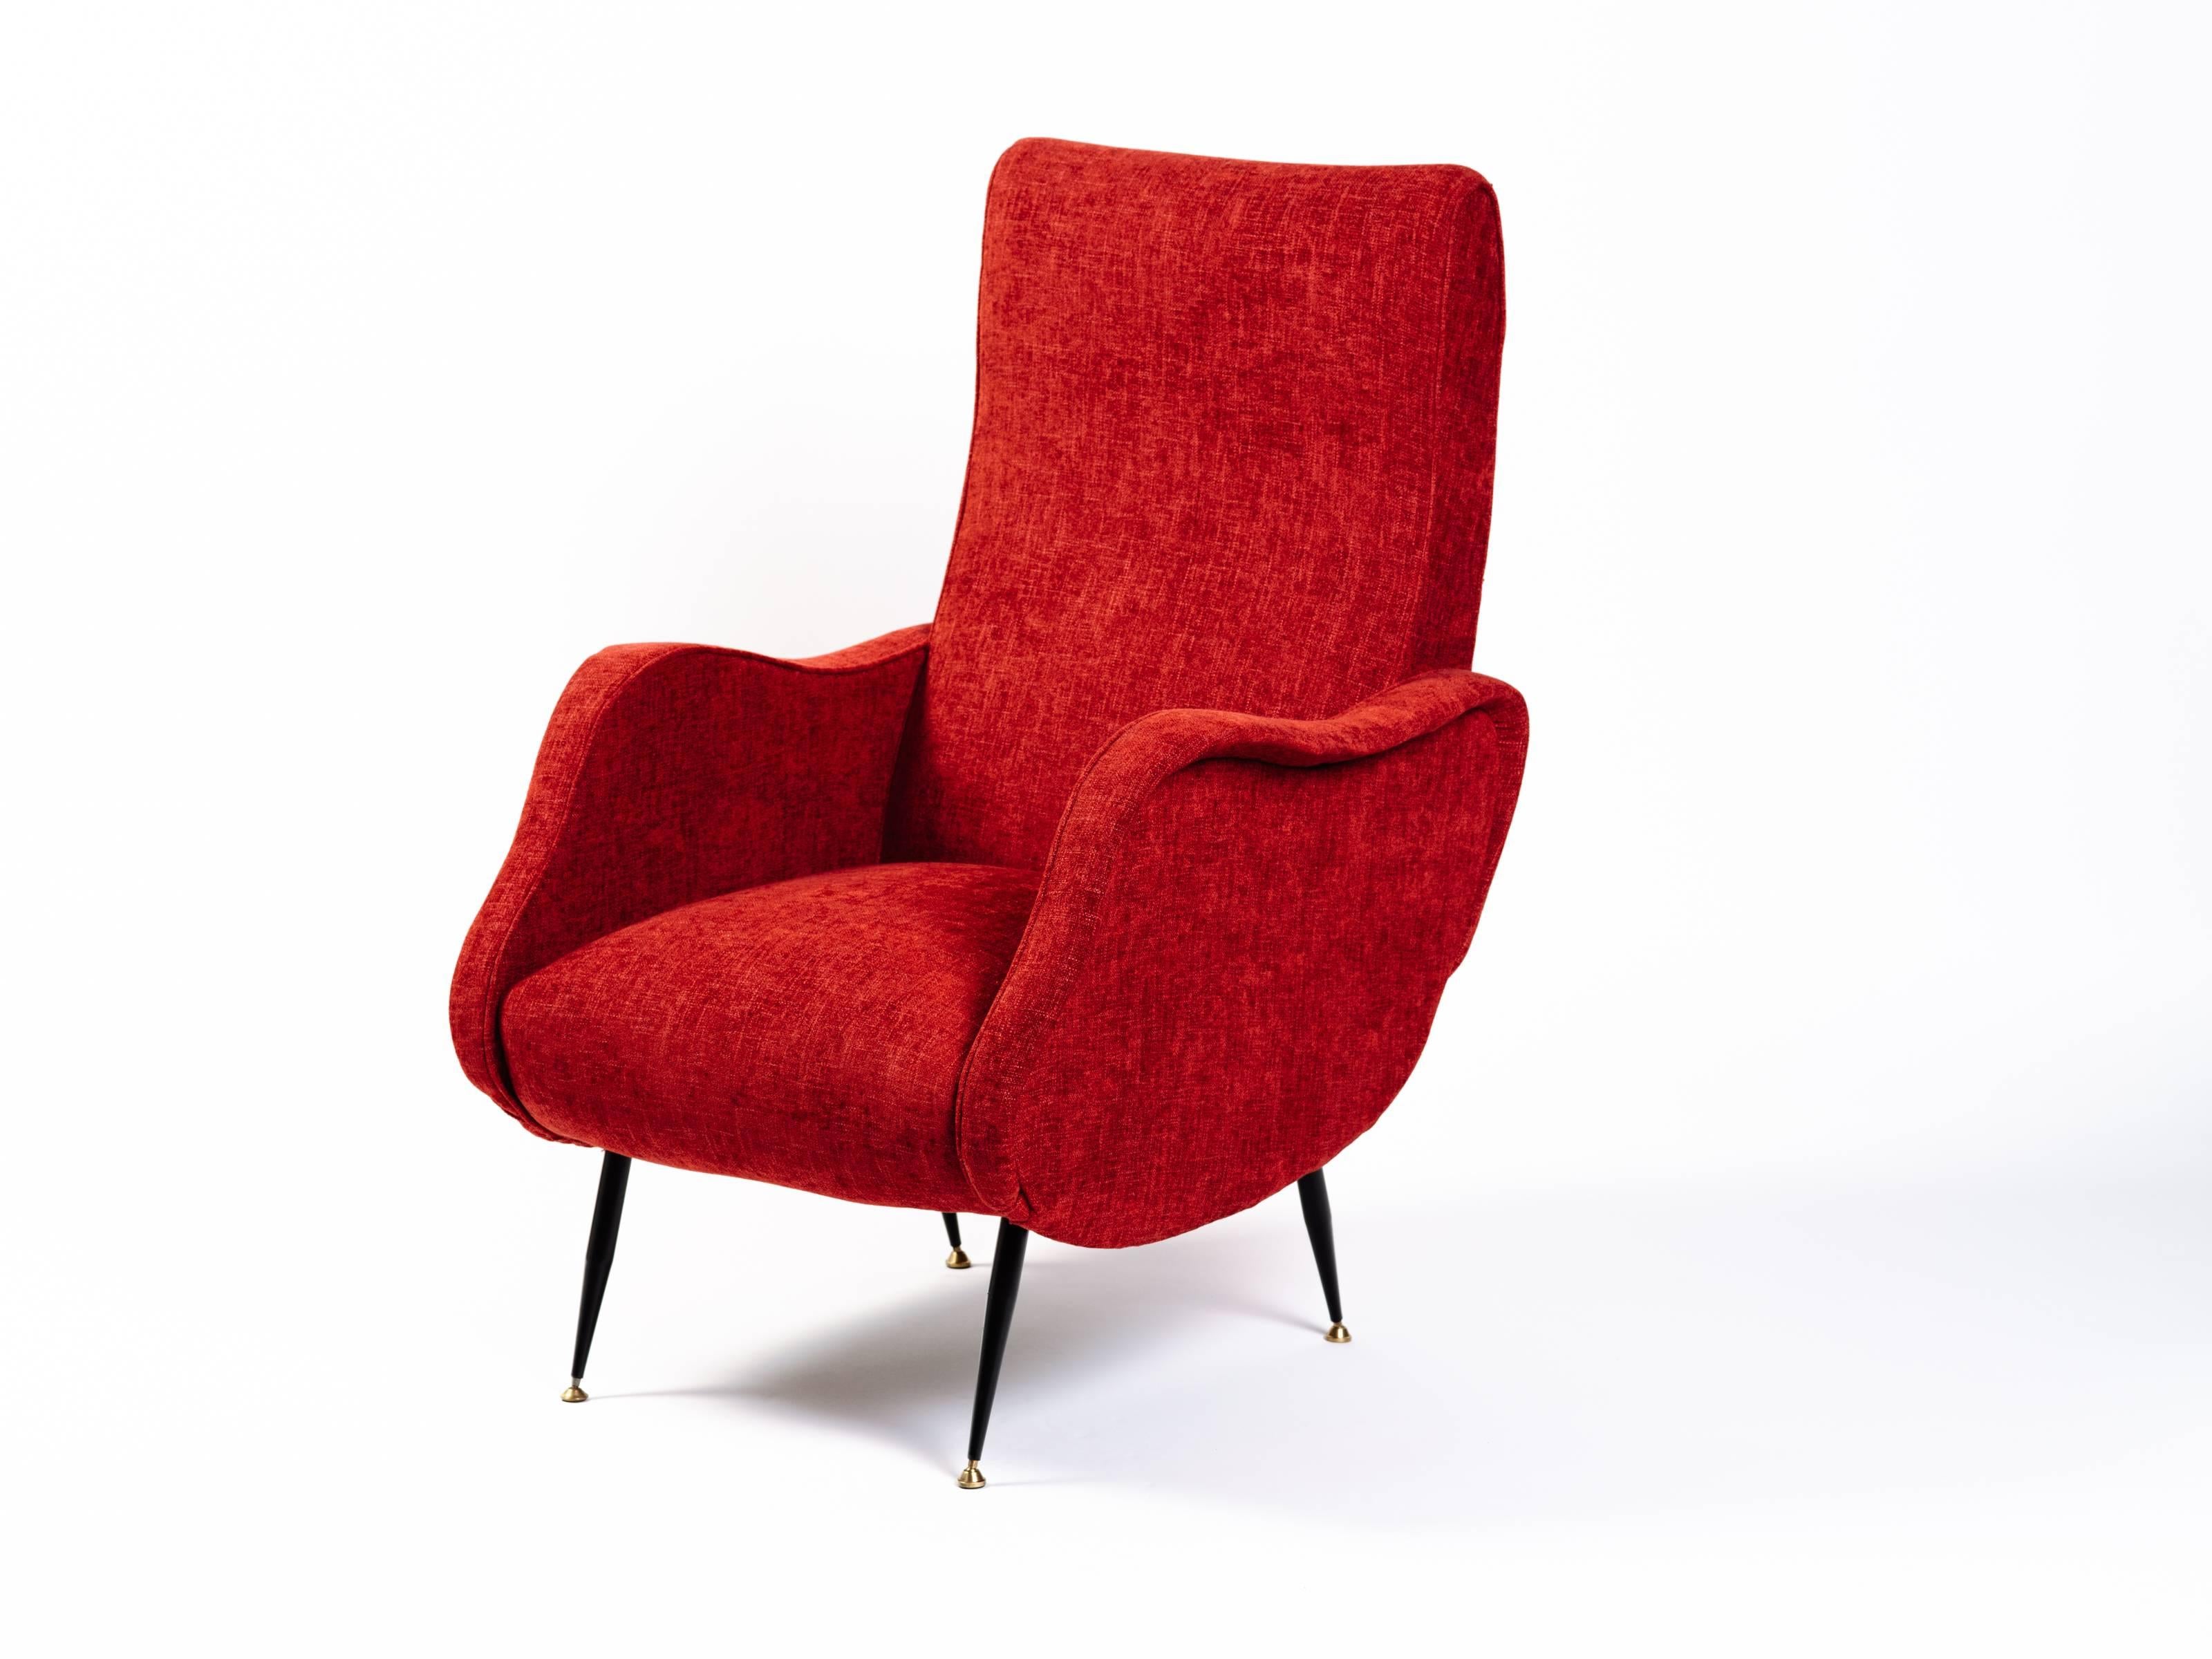 Iconic Italian Mid-Century Modern lounge chair in the style of Marco Zanuso, upholstered in vibrant woven red. Chair features slightly reclined back with kidney shaped sides. The chair has narrow splayed legs in black enameled metal with brass